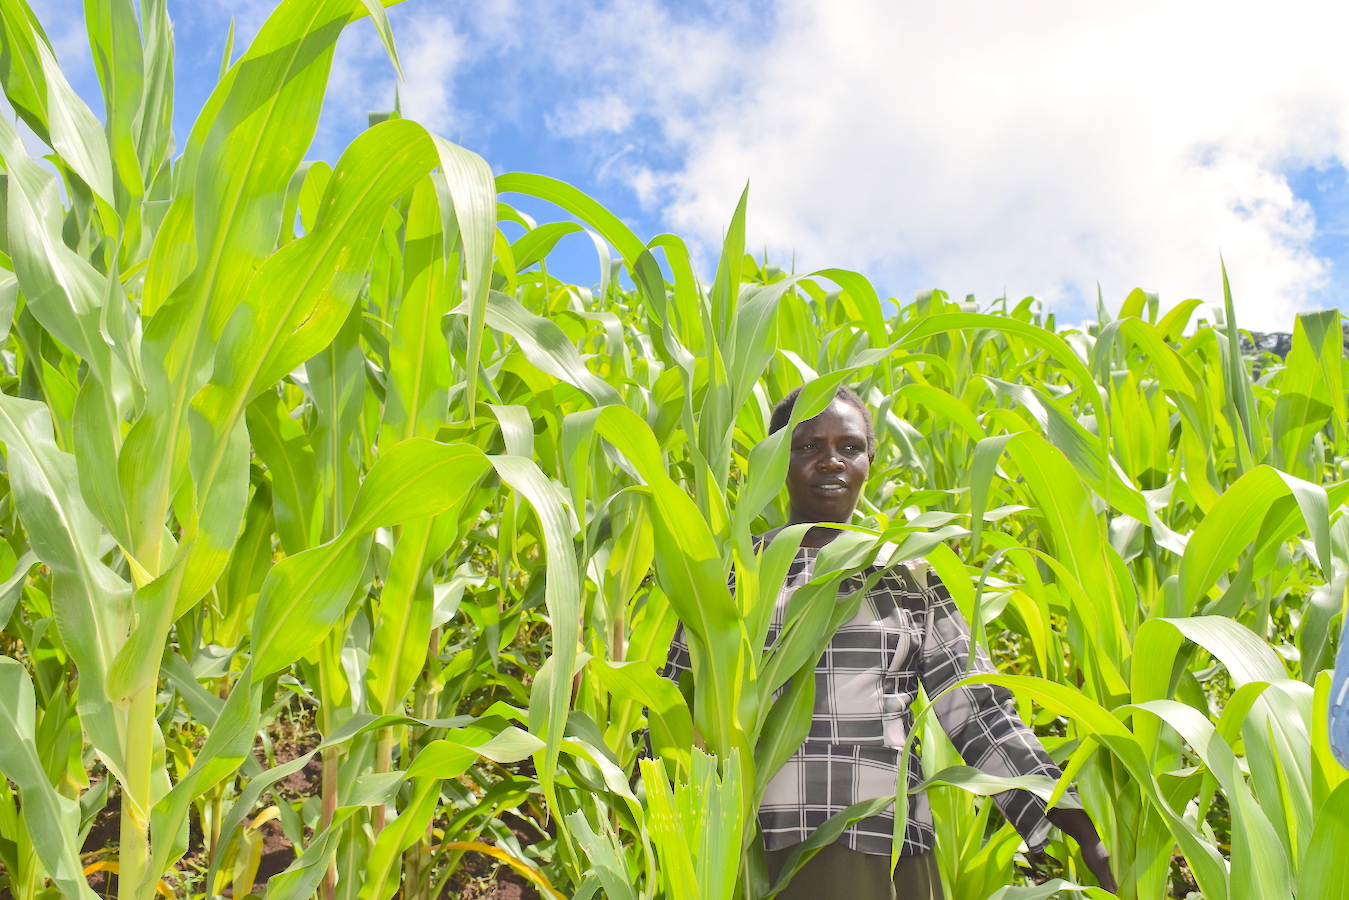 A majority of Kenyans rely on agriculture to sustain their livelihoods. ©World Vision Photo/Sarah Ooko.